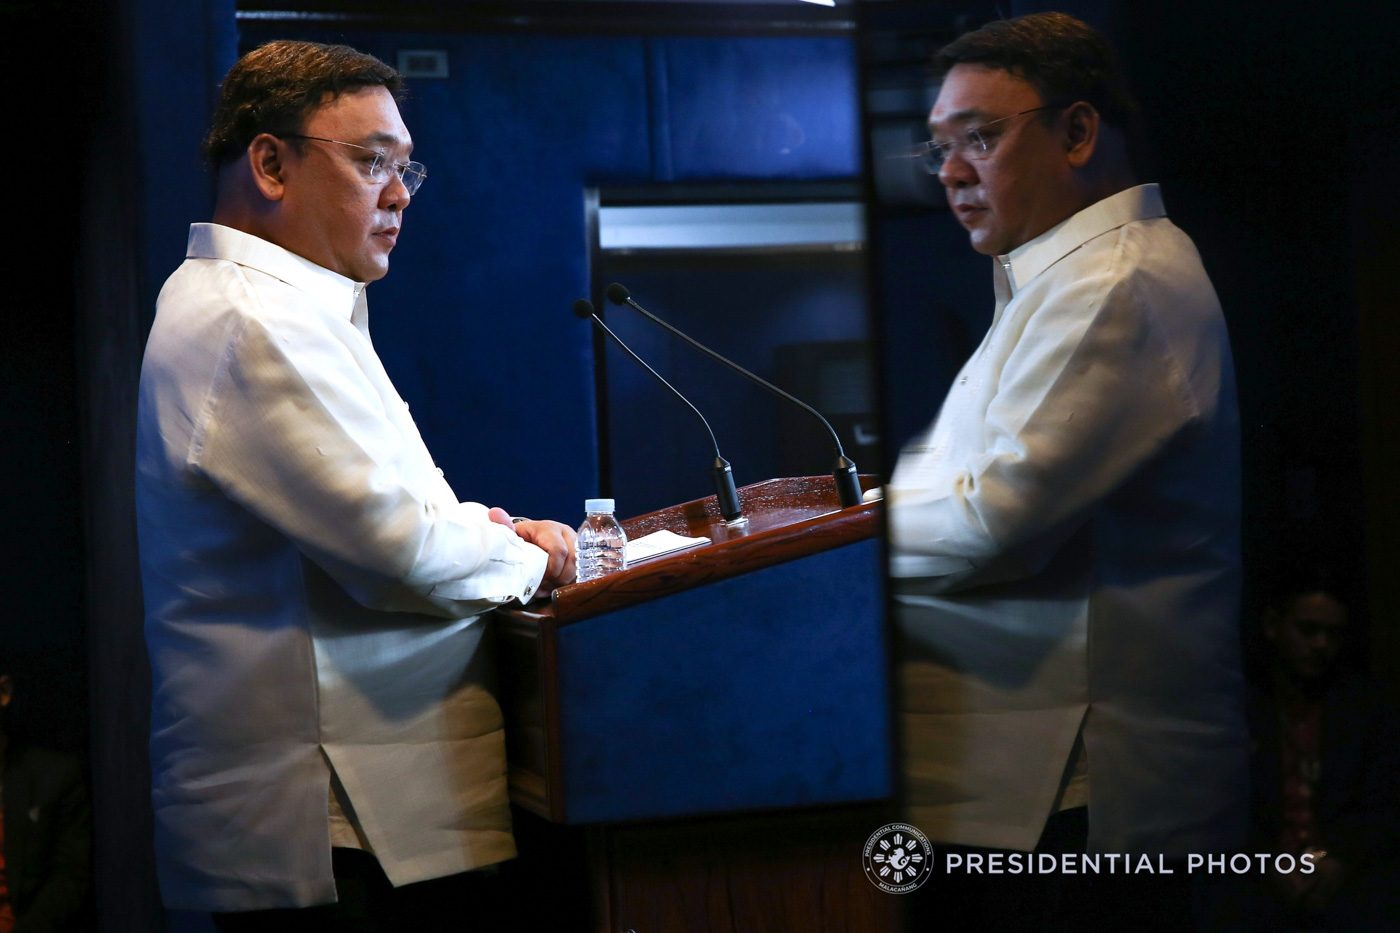 Roque once slammed China as ‘aggressor’ in international law